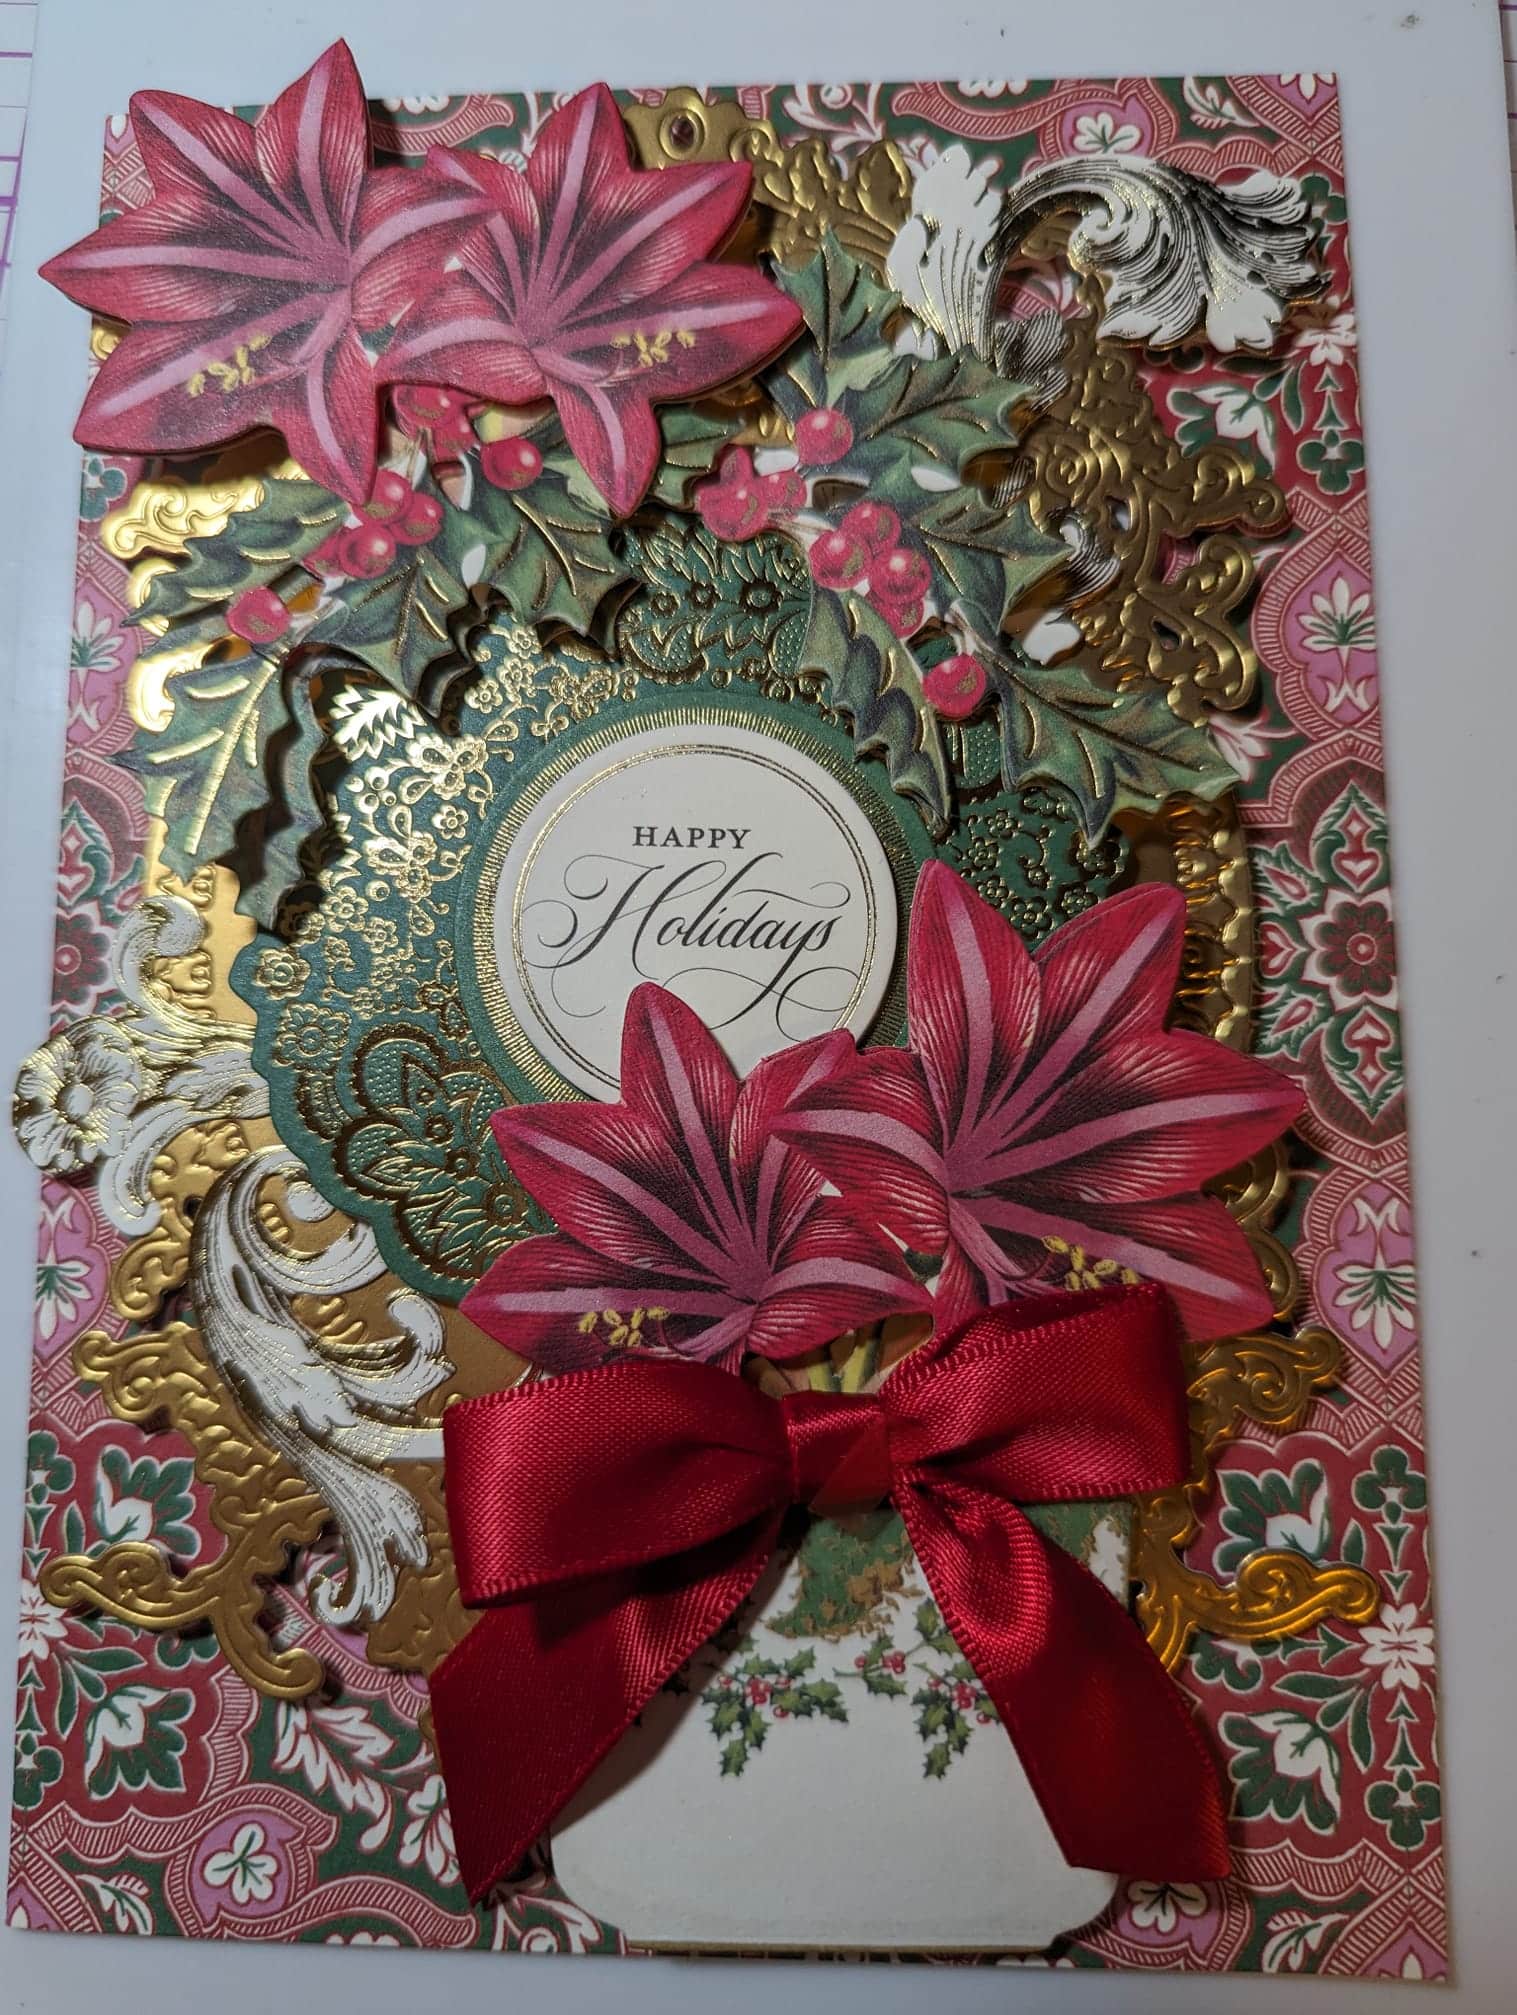 A holiday card with a bow and red flowers.